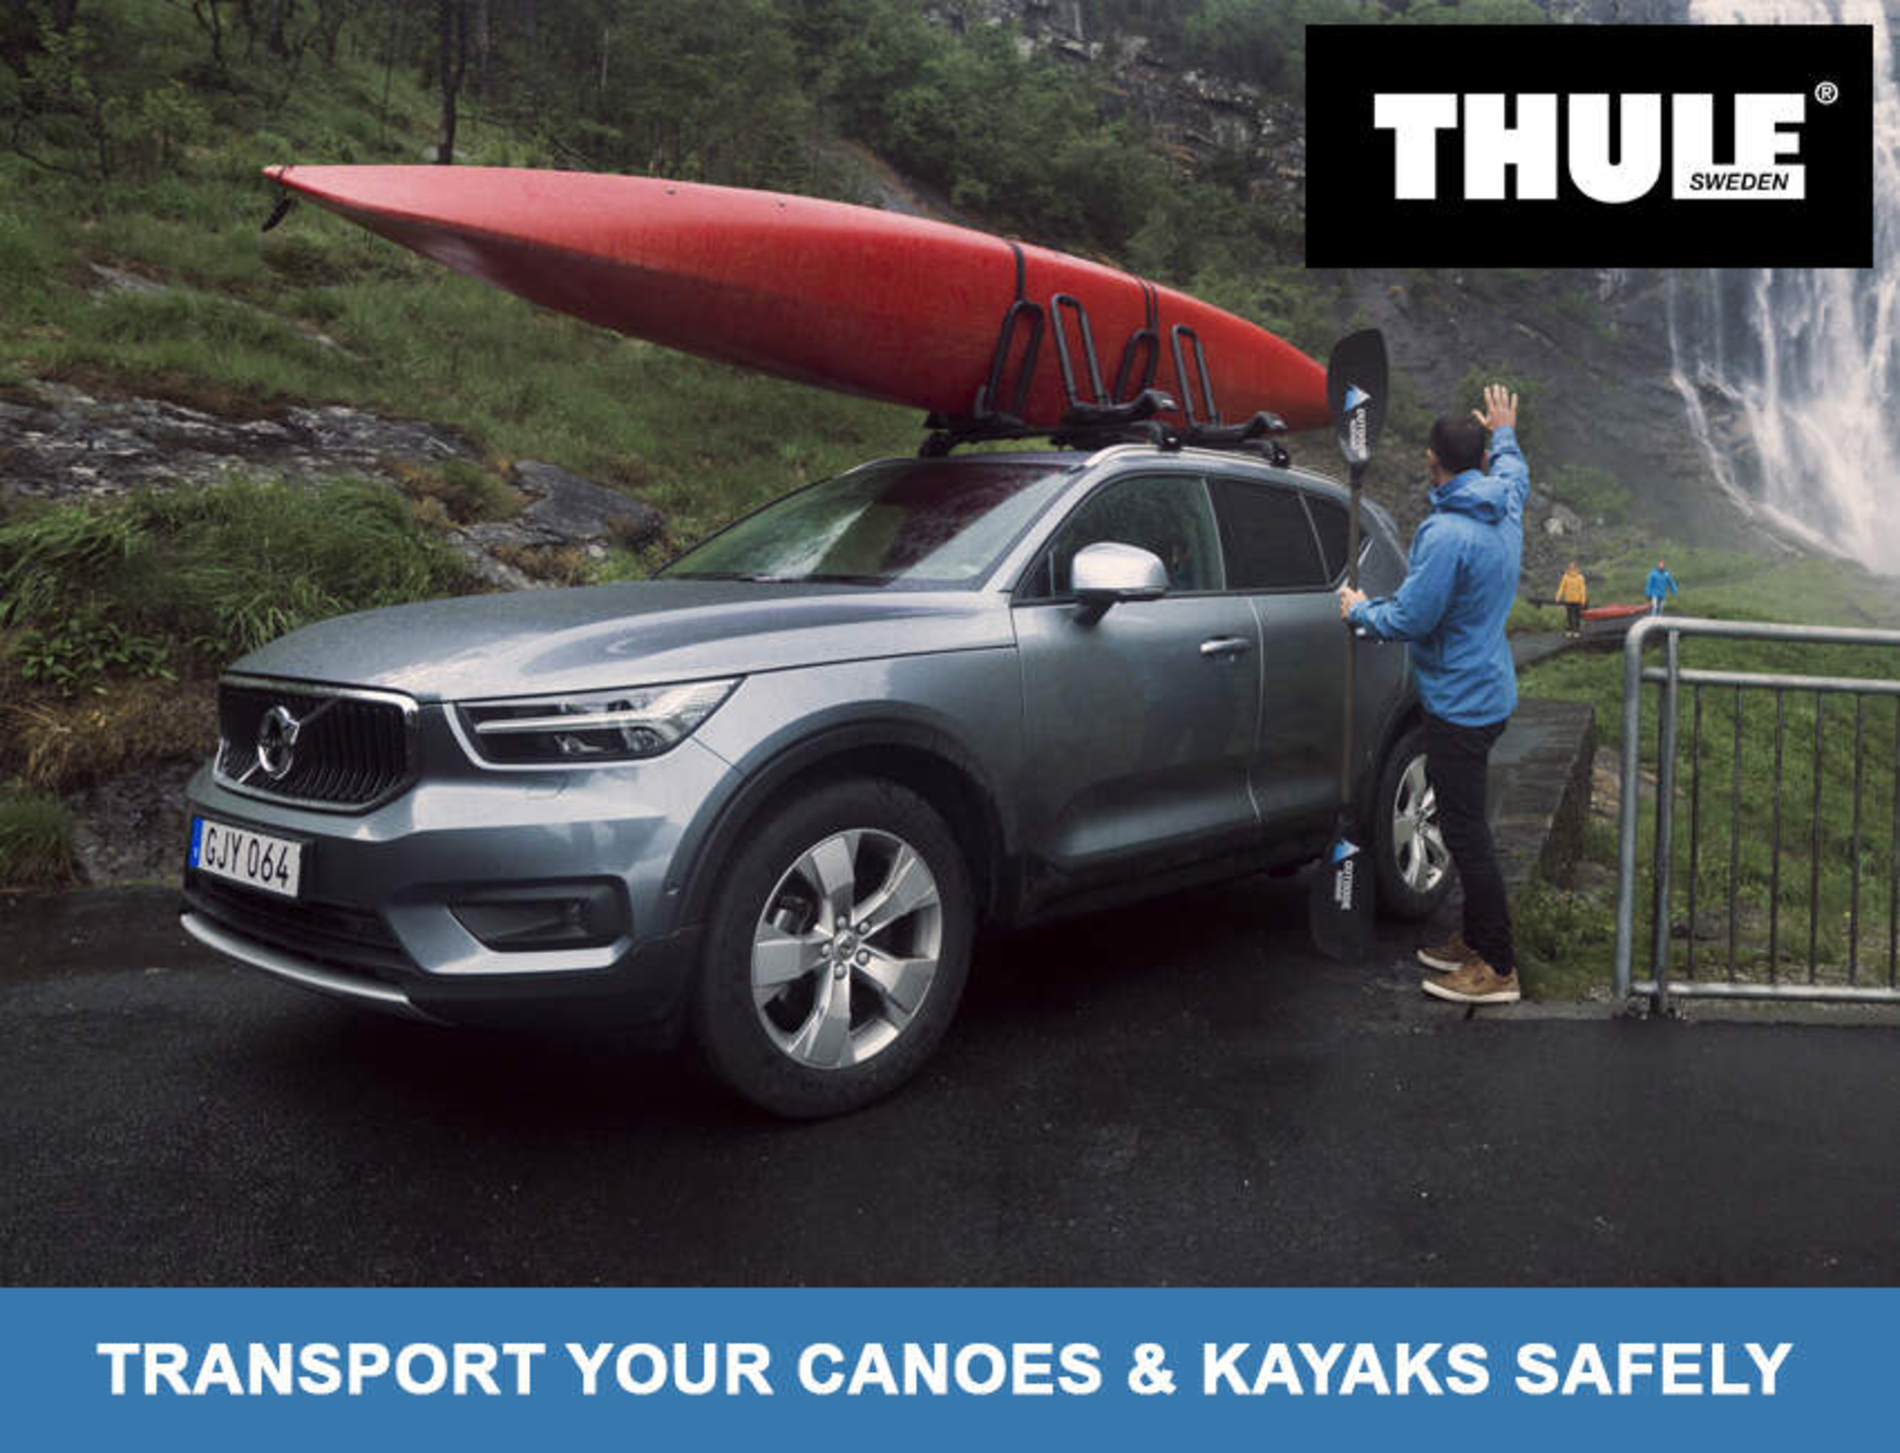 Thule stockist in East Sussex